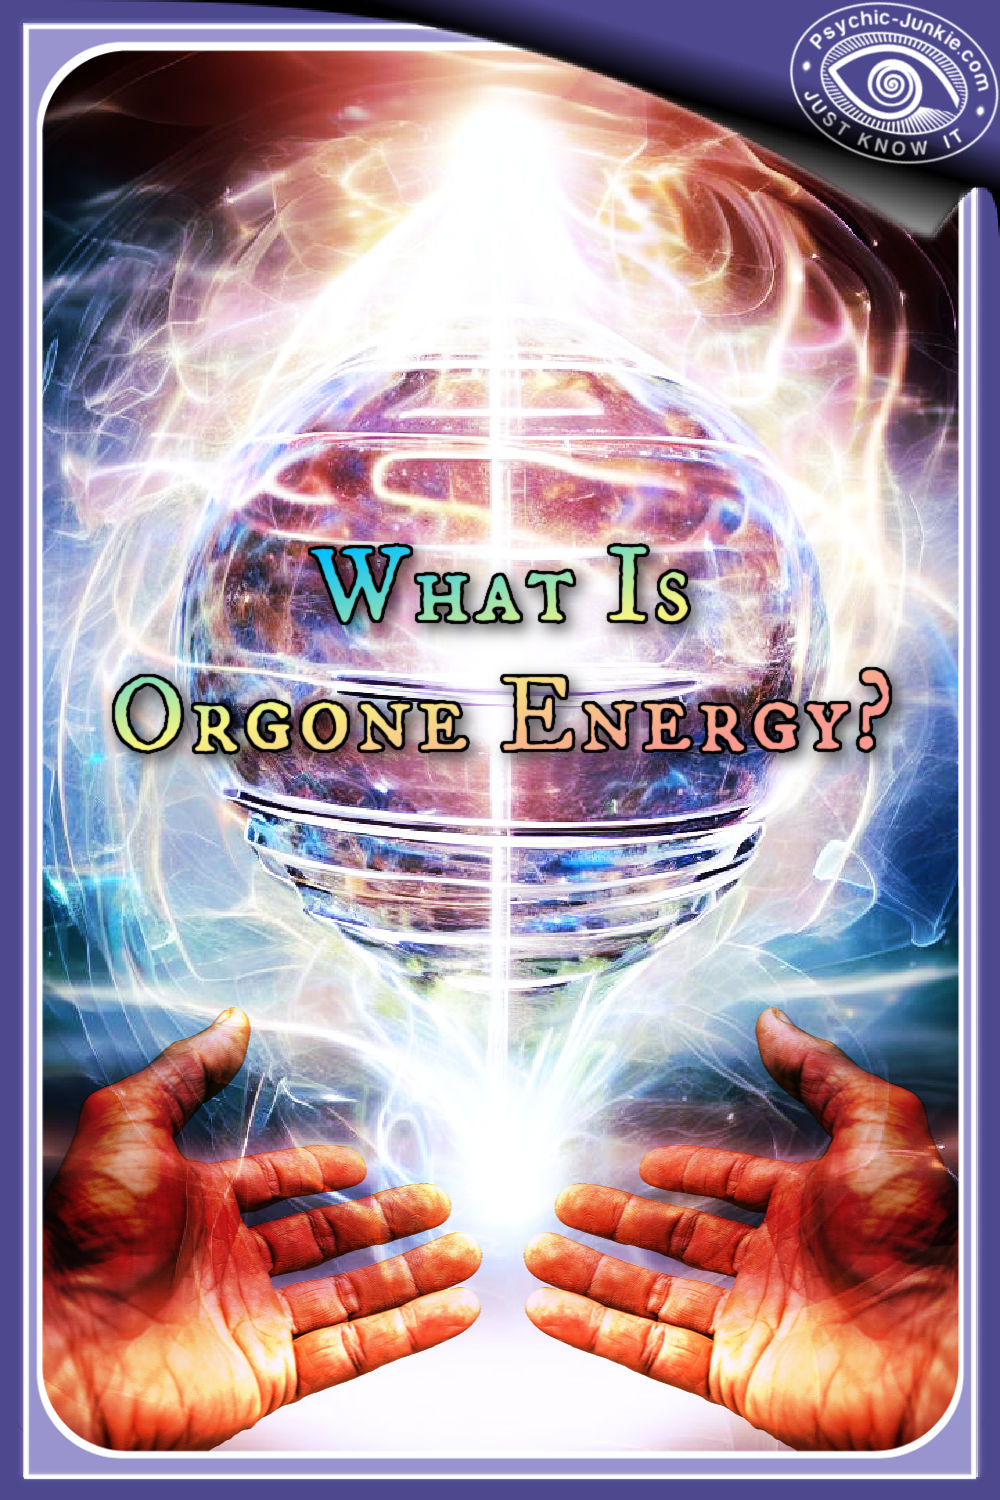 Get Your Hands On Some Orgone Energy